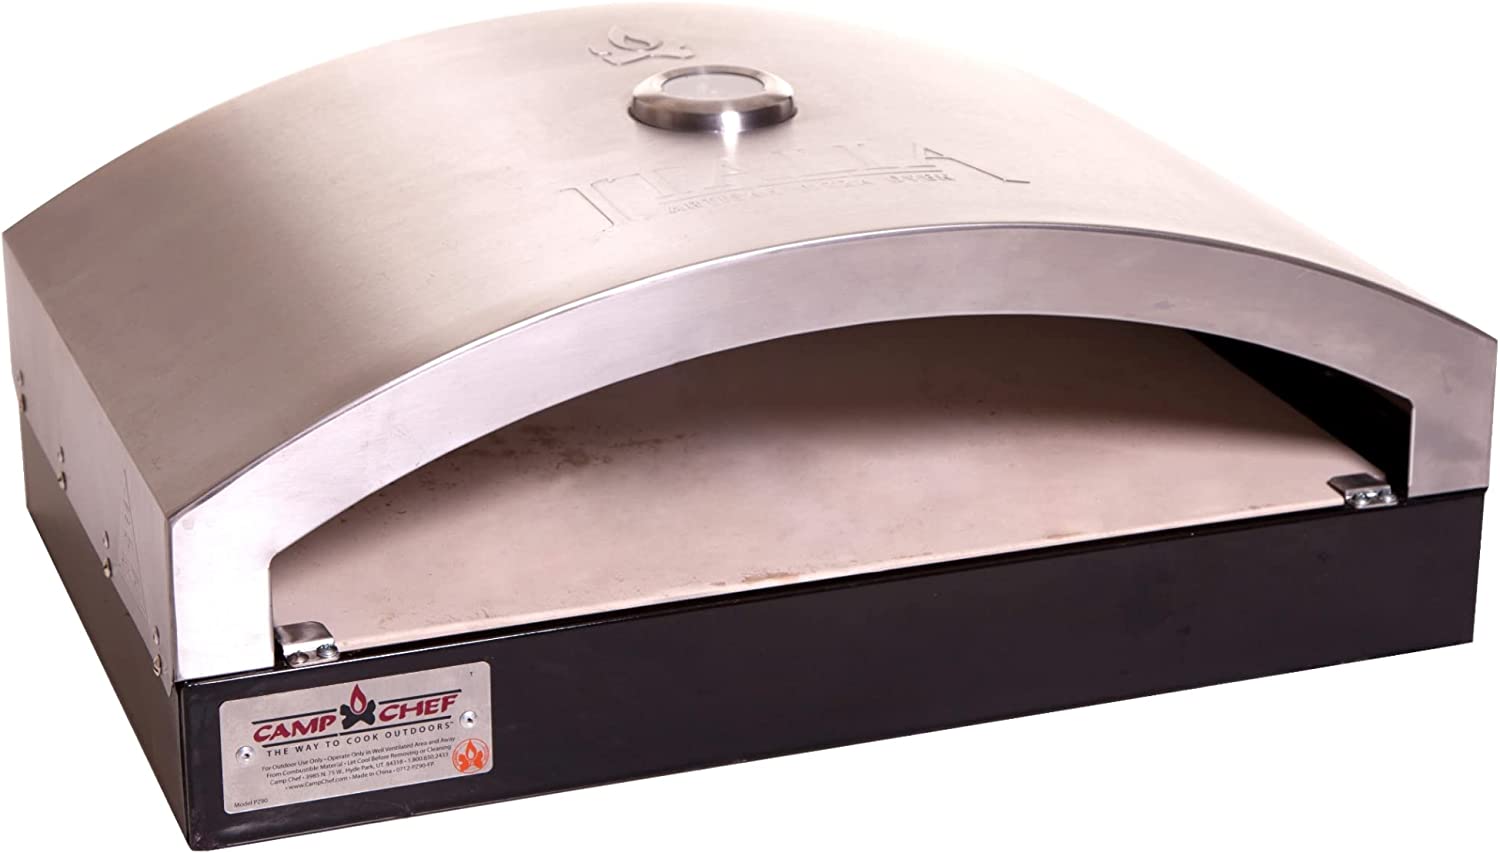 Camp Chef Artisan Outdoor Pizza Oven, 16 Two Burner Accessory